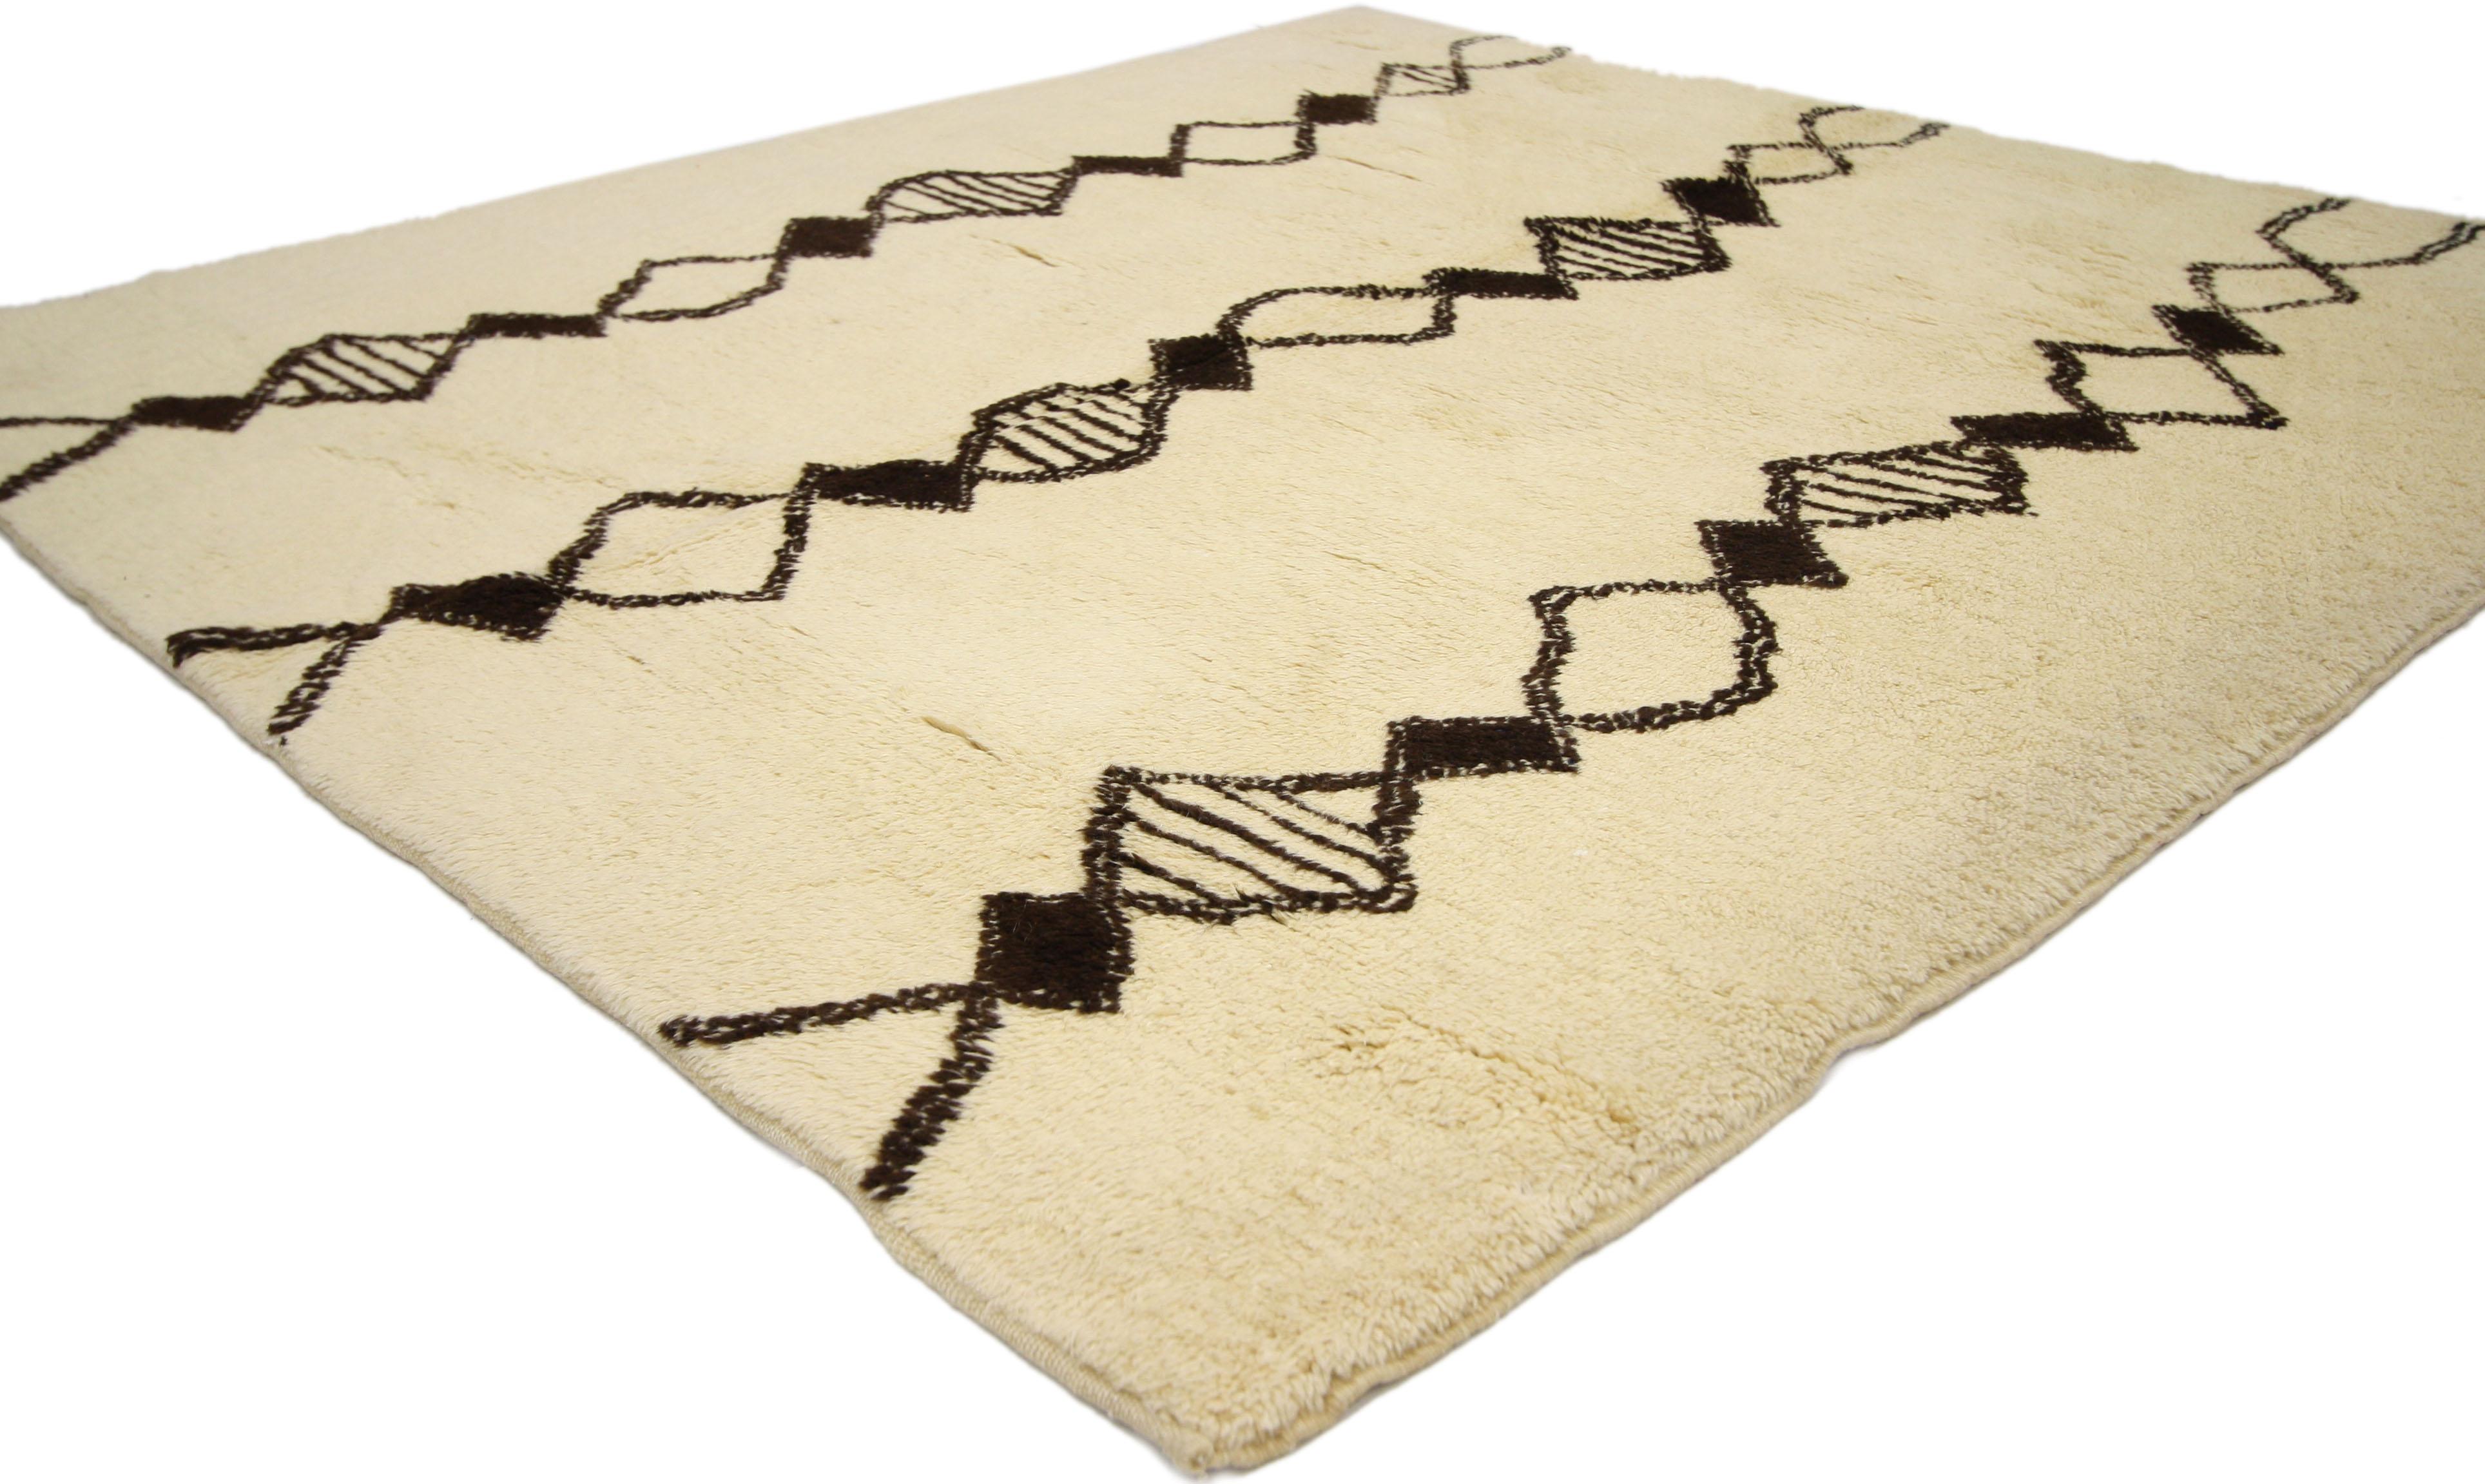 Hand-Knotted Contemporary Berber Moroccan Rug with Minimalist Bauhaus Style